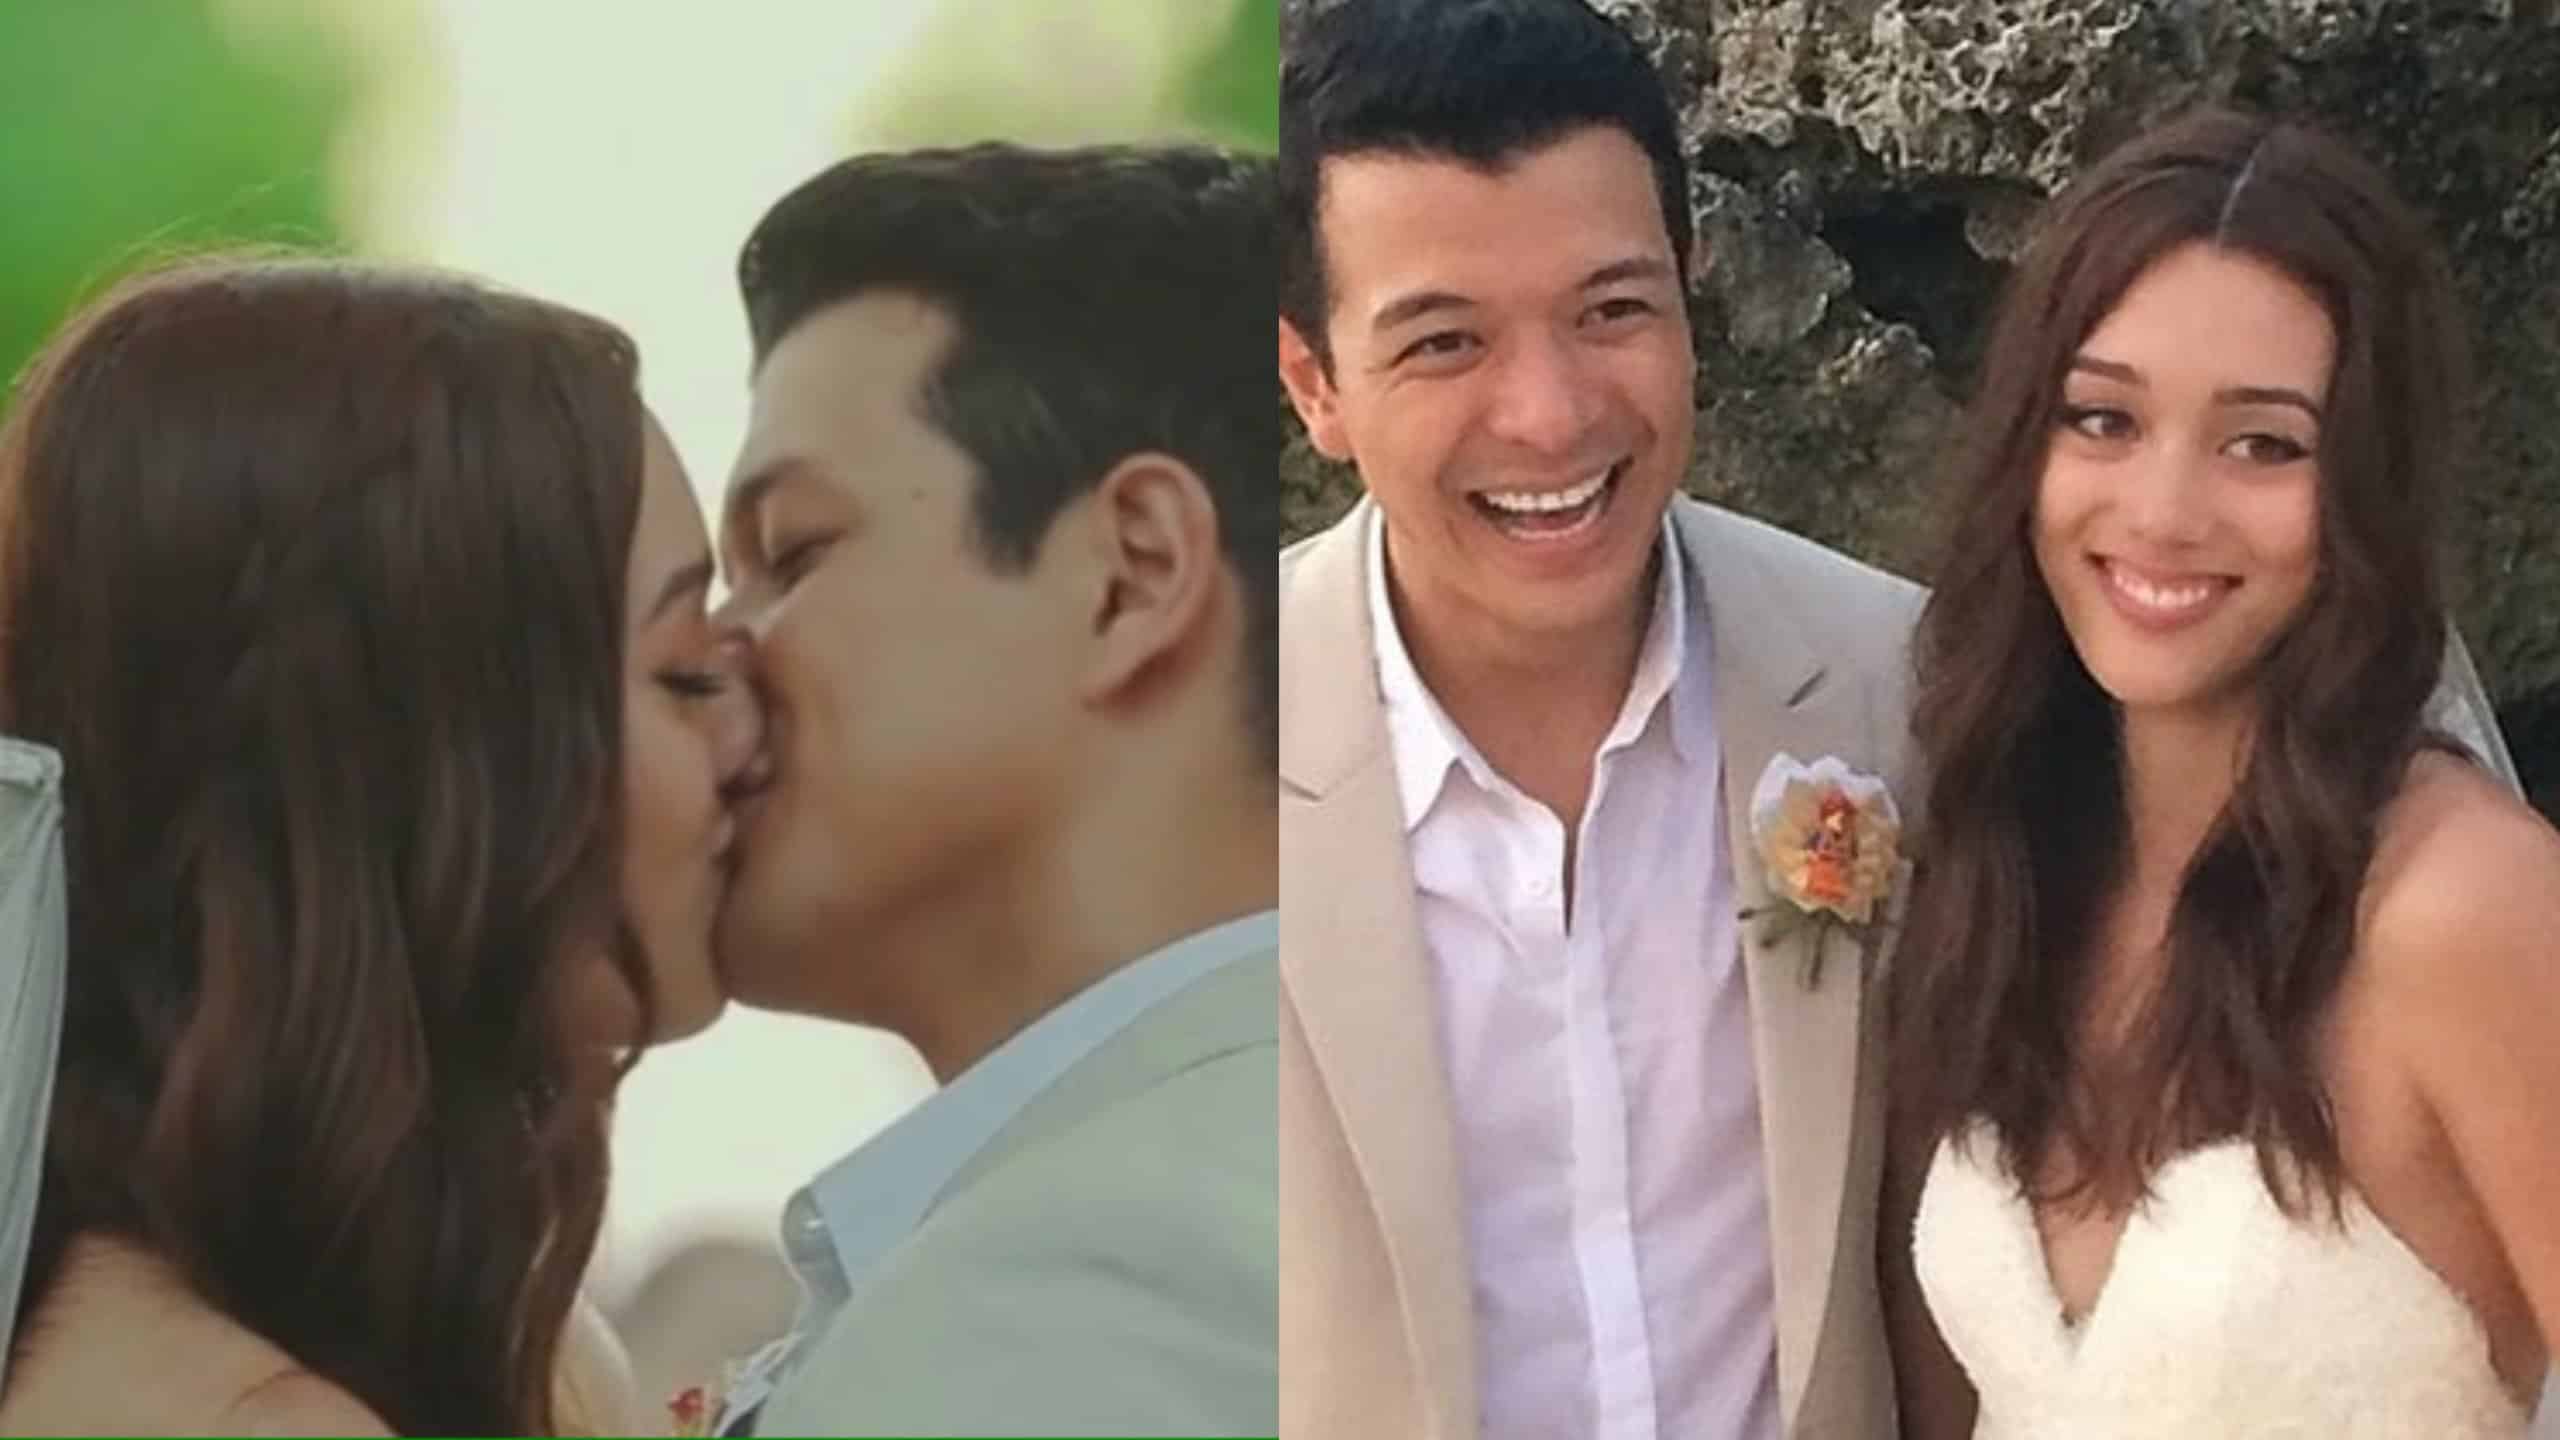 No baby plans yet for Kim Jones and Jericho Rosales